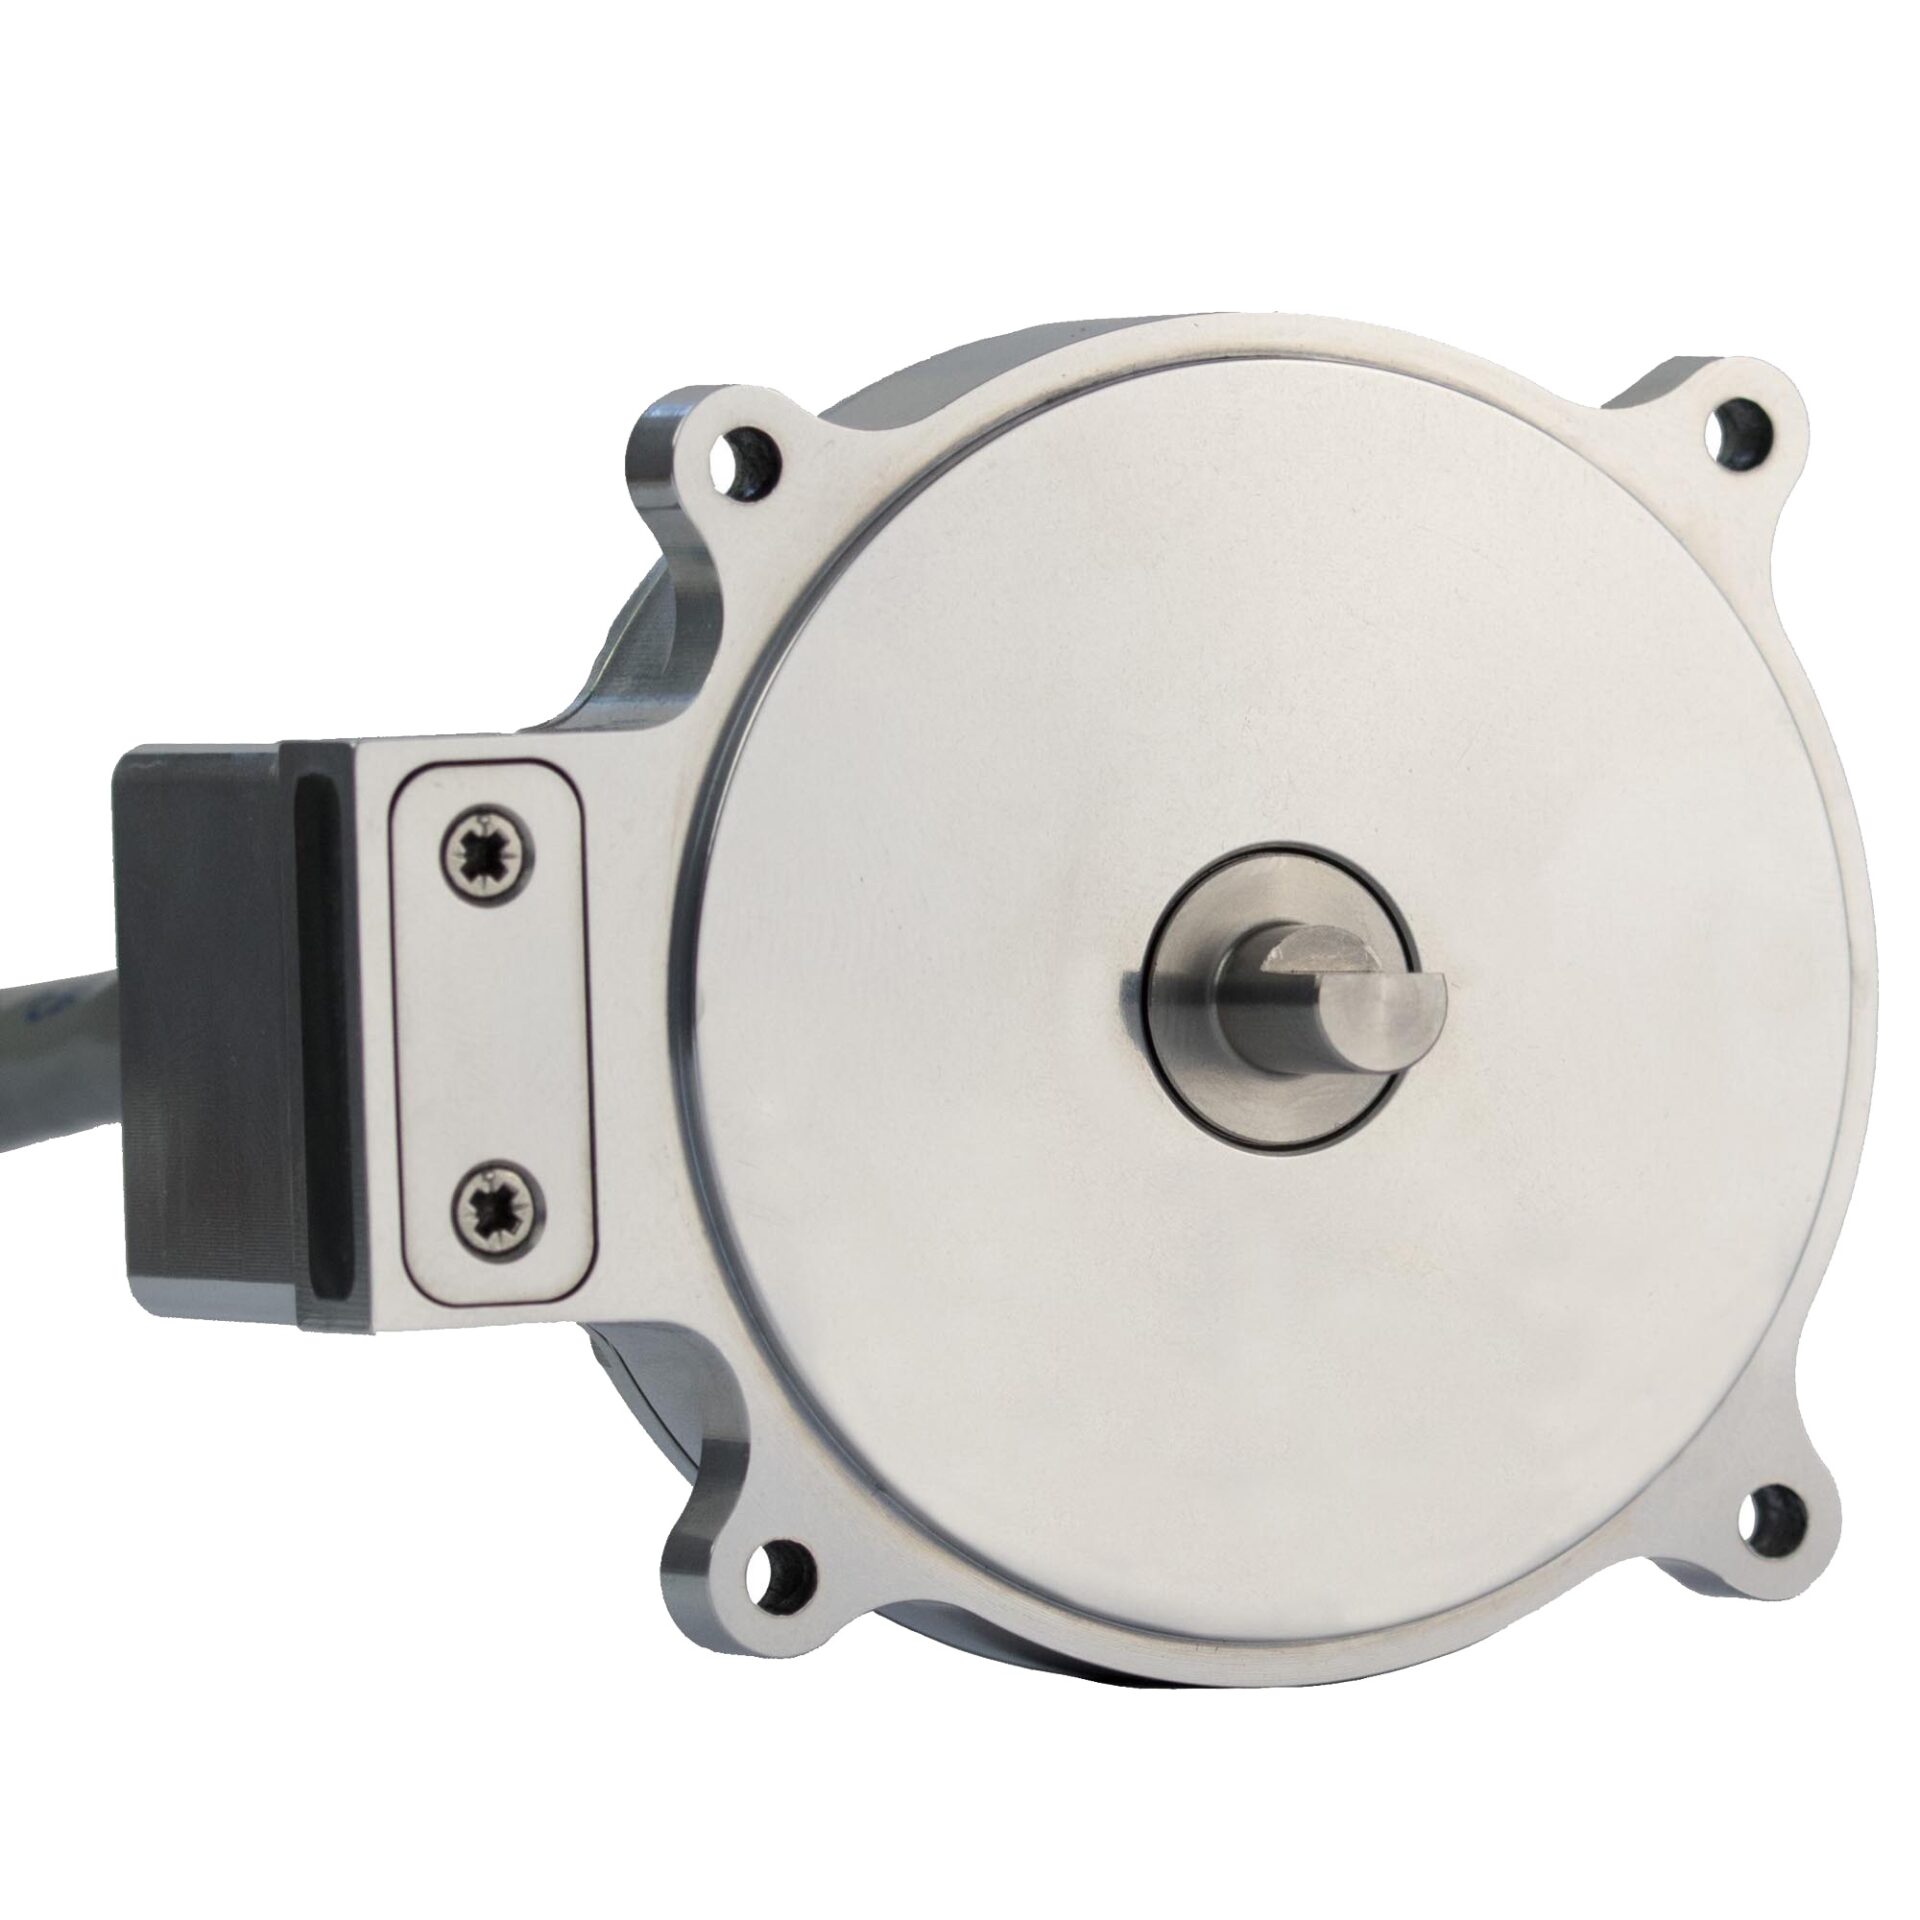 The global Shaft Encoders market is valued at USD million in 2020 is expected to reach USD million by the end of 2026, growing at a CAGR of during 2021-2026.